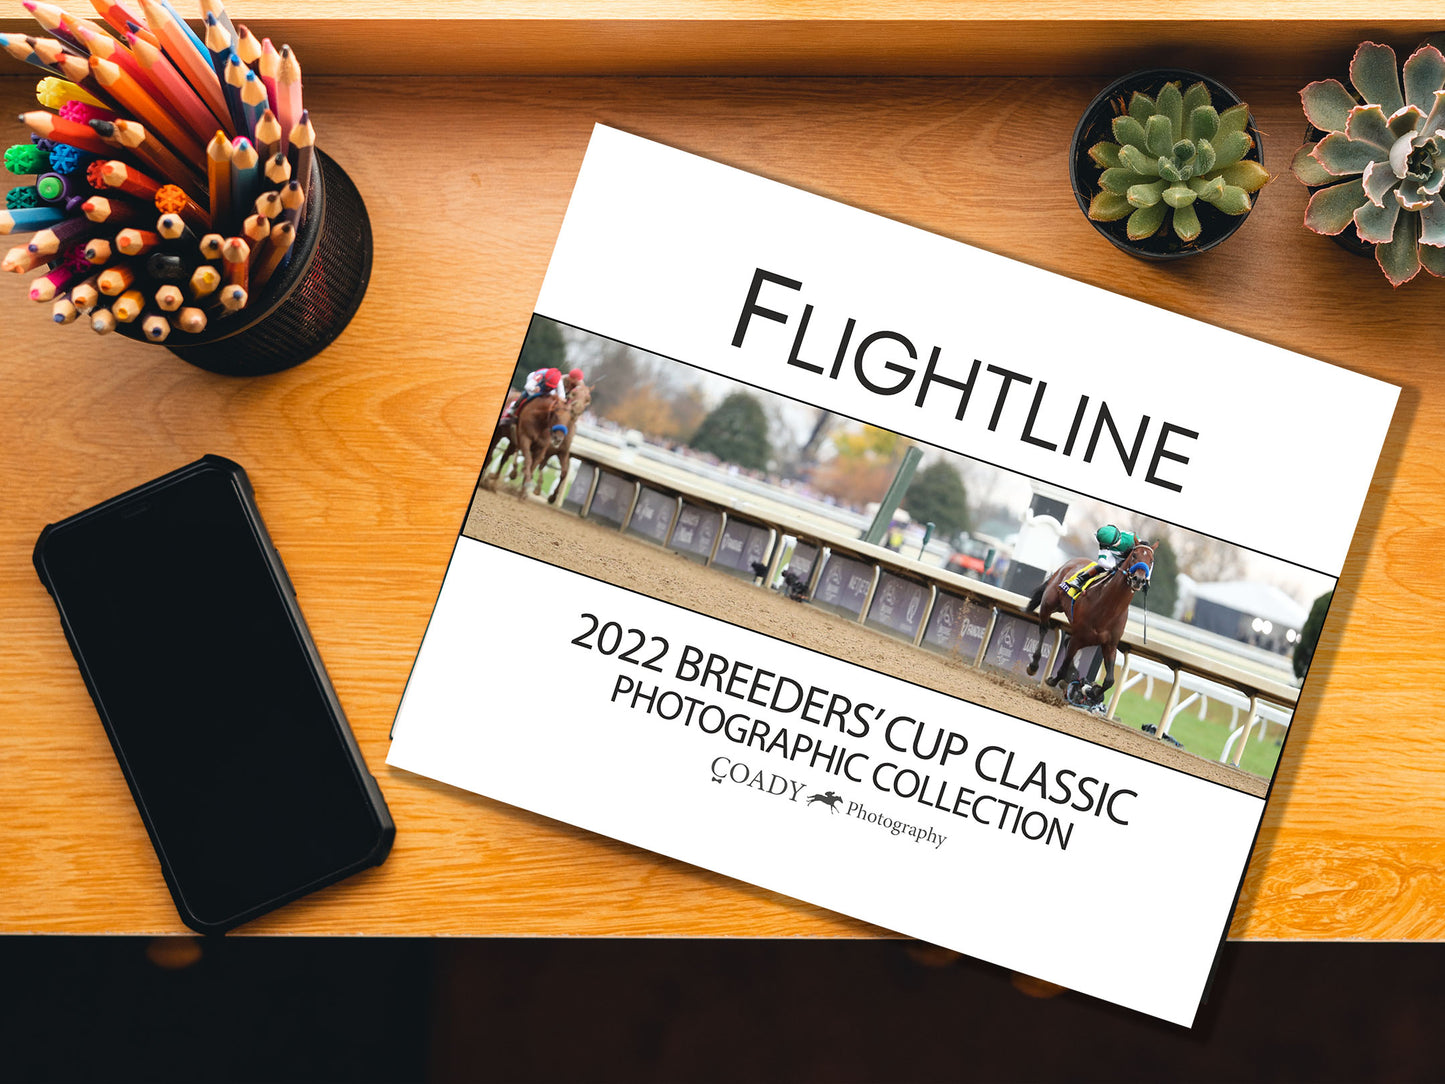 Flightline - 2022 Breeders' Cup Classic - Photographic Collection